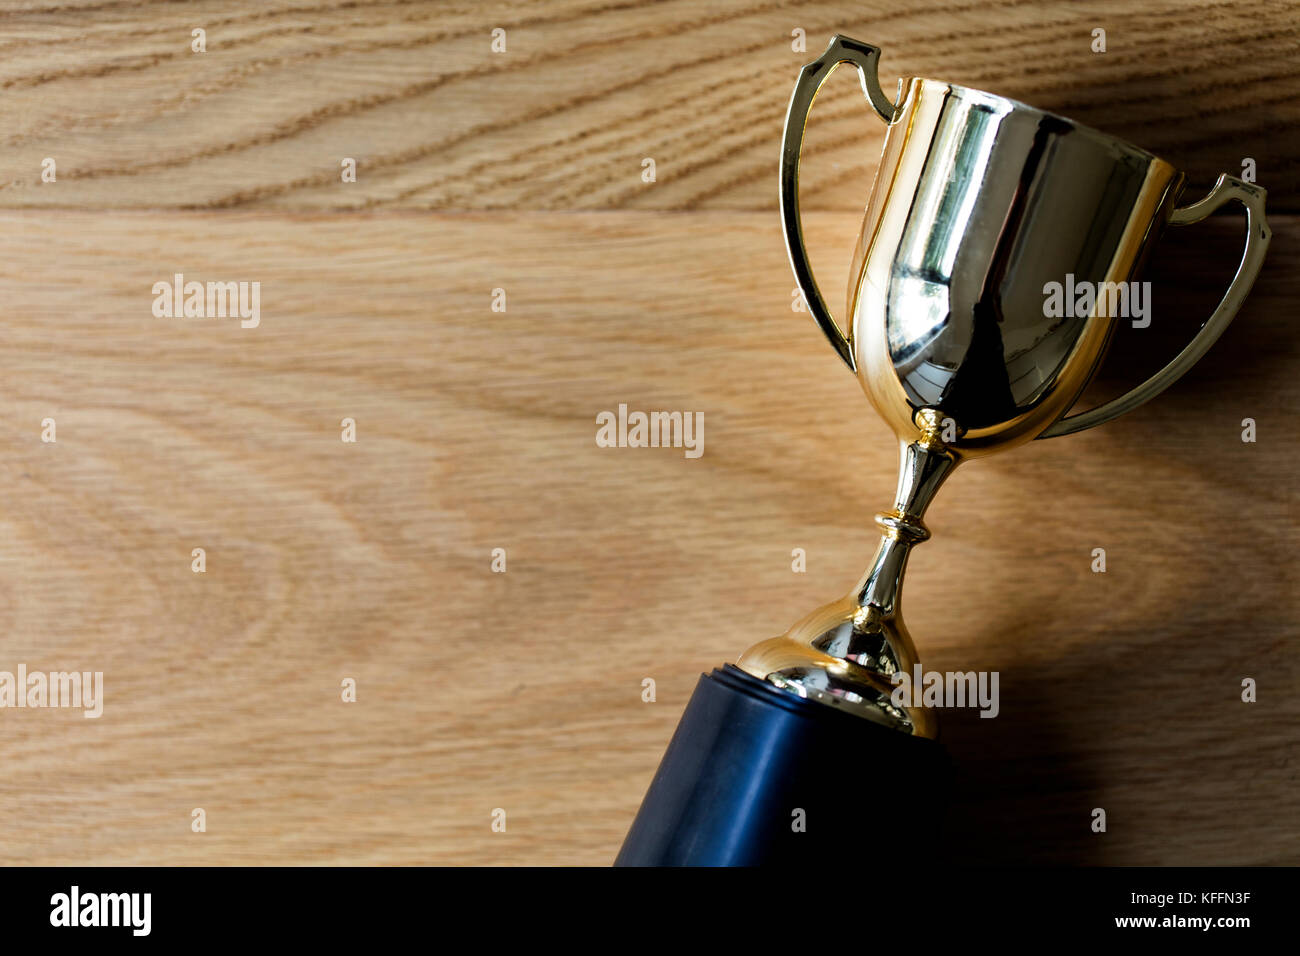 Gold winners trophy award on a wooden background Stock Photo